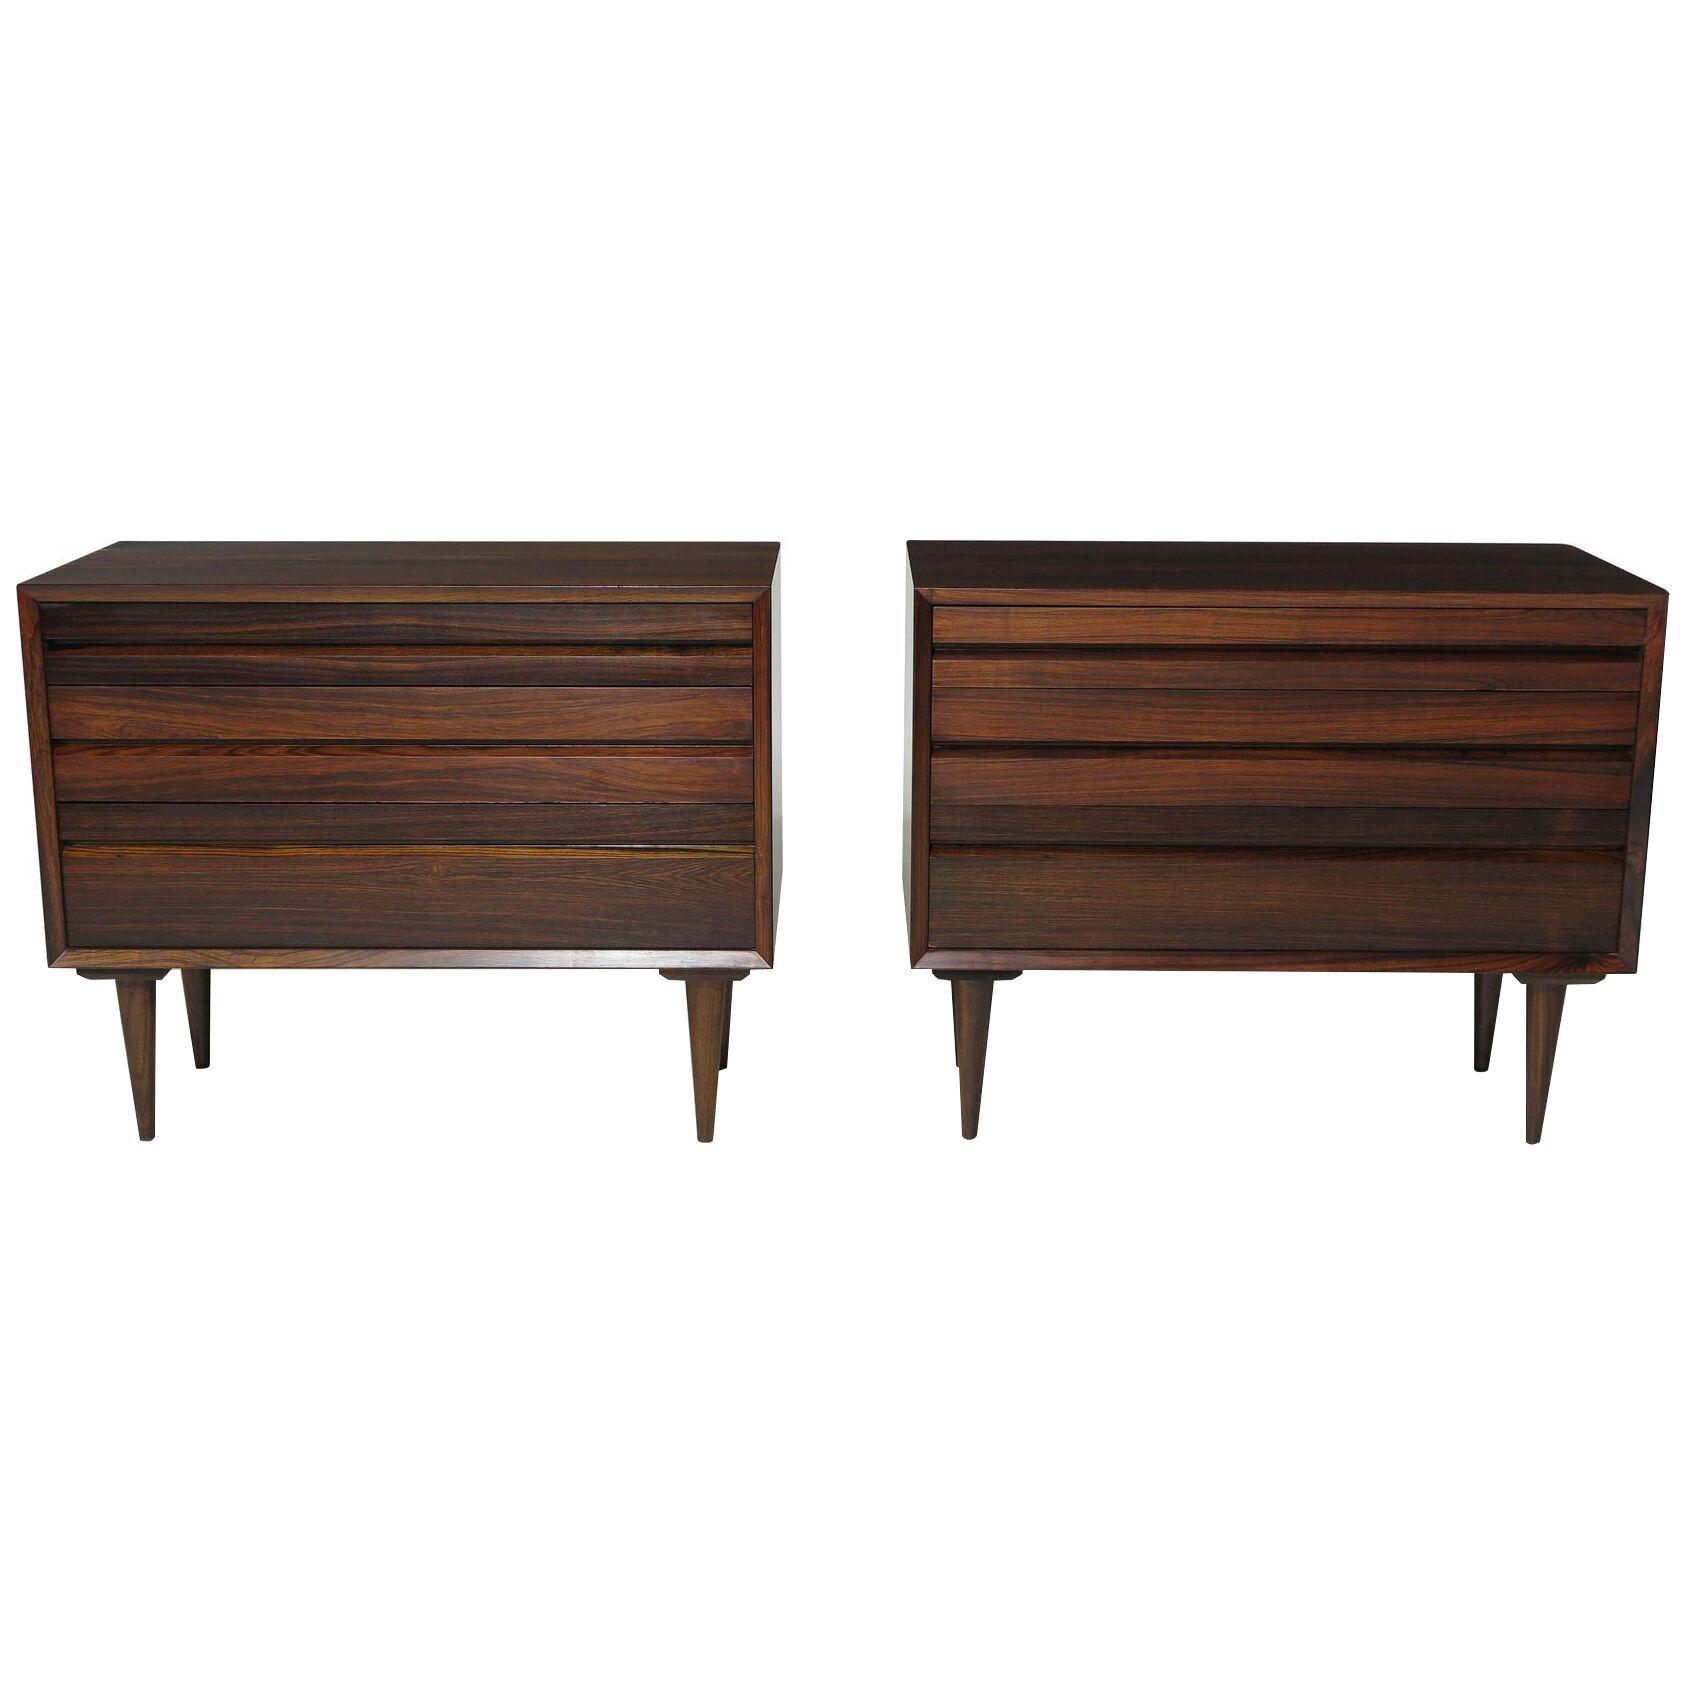 Poul Cadovius Rosewood Nightstand Cabinets